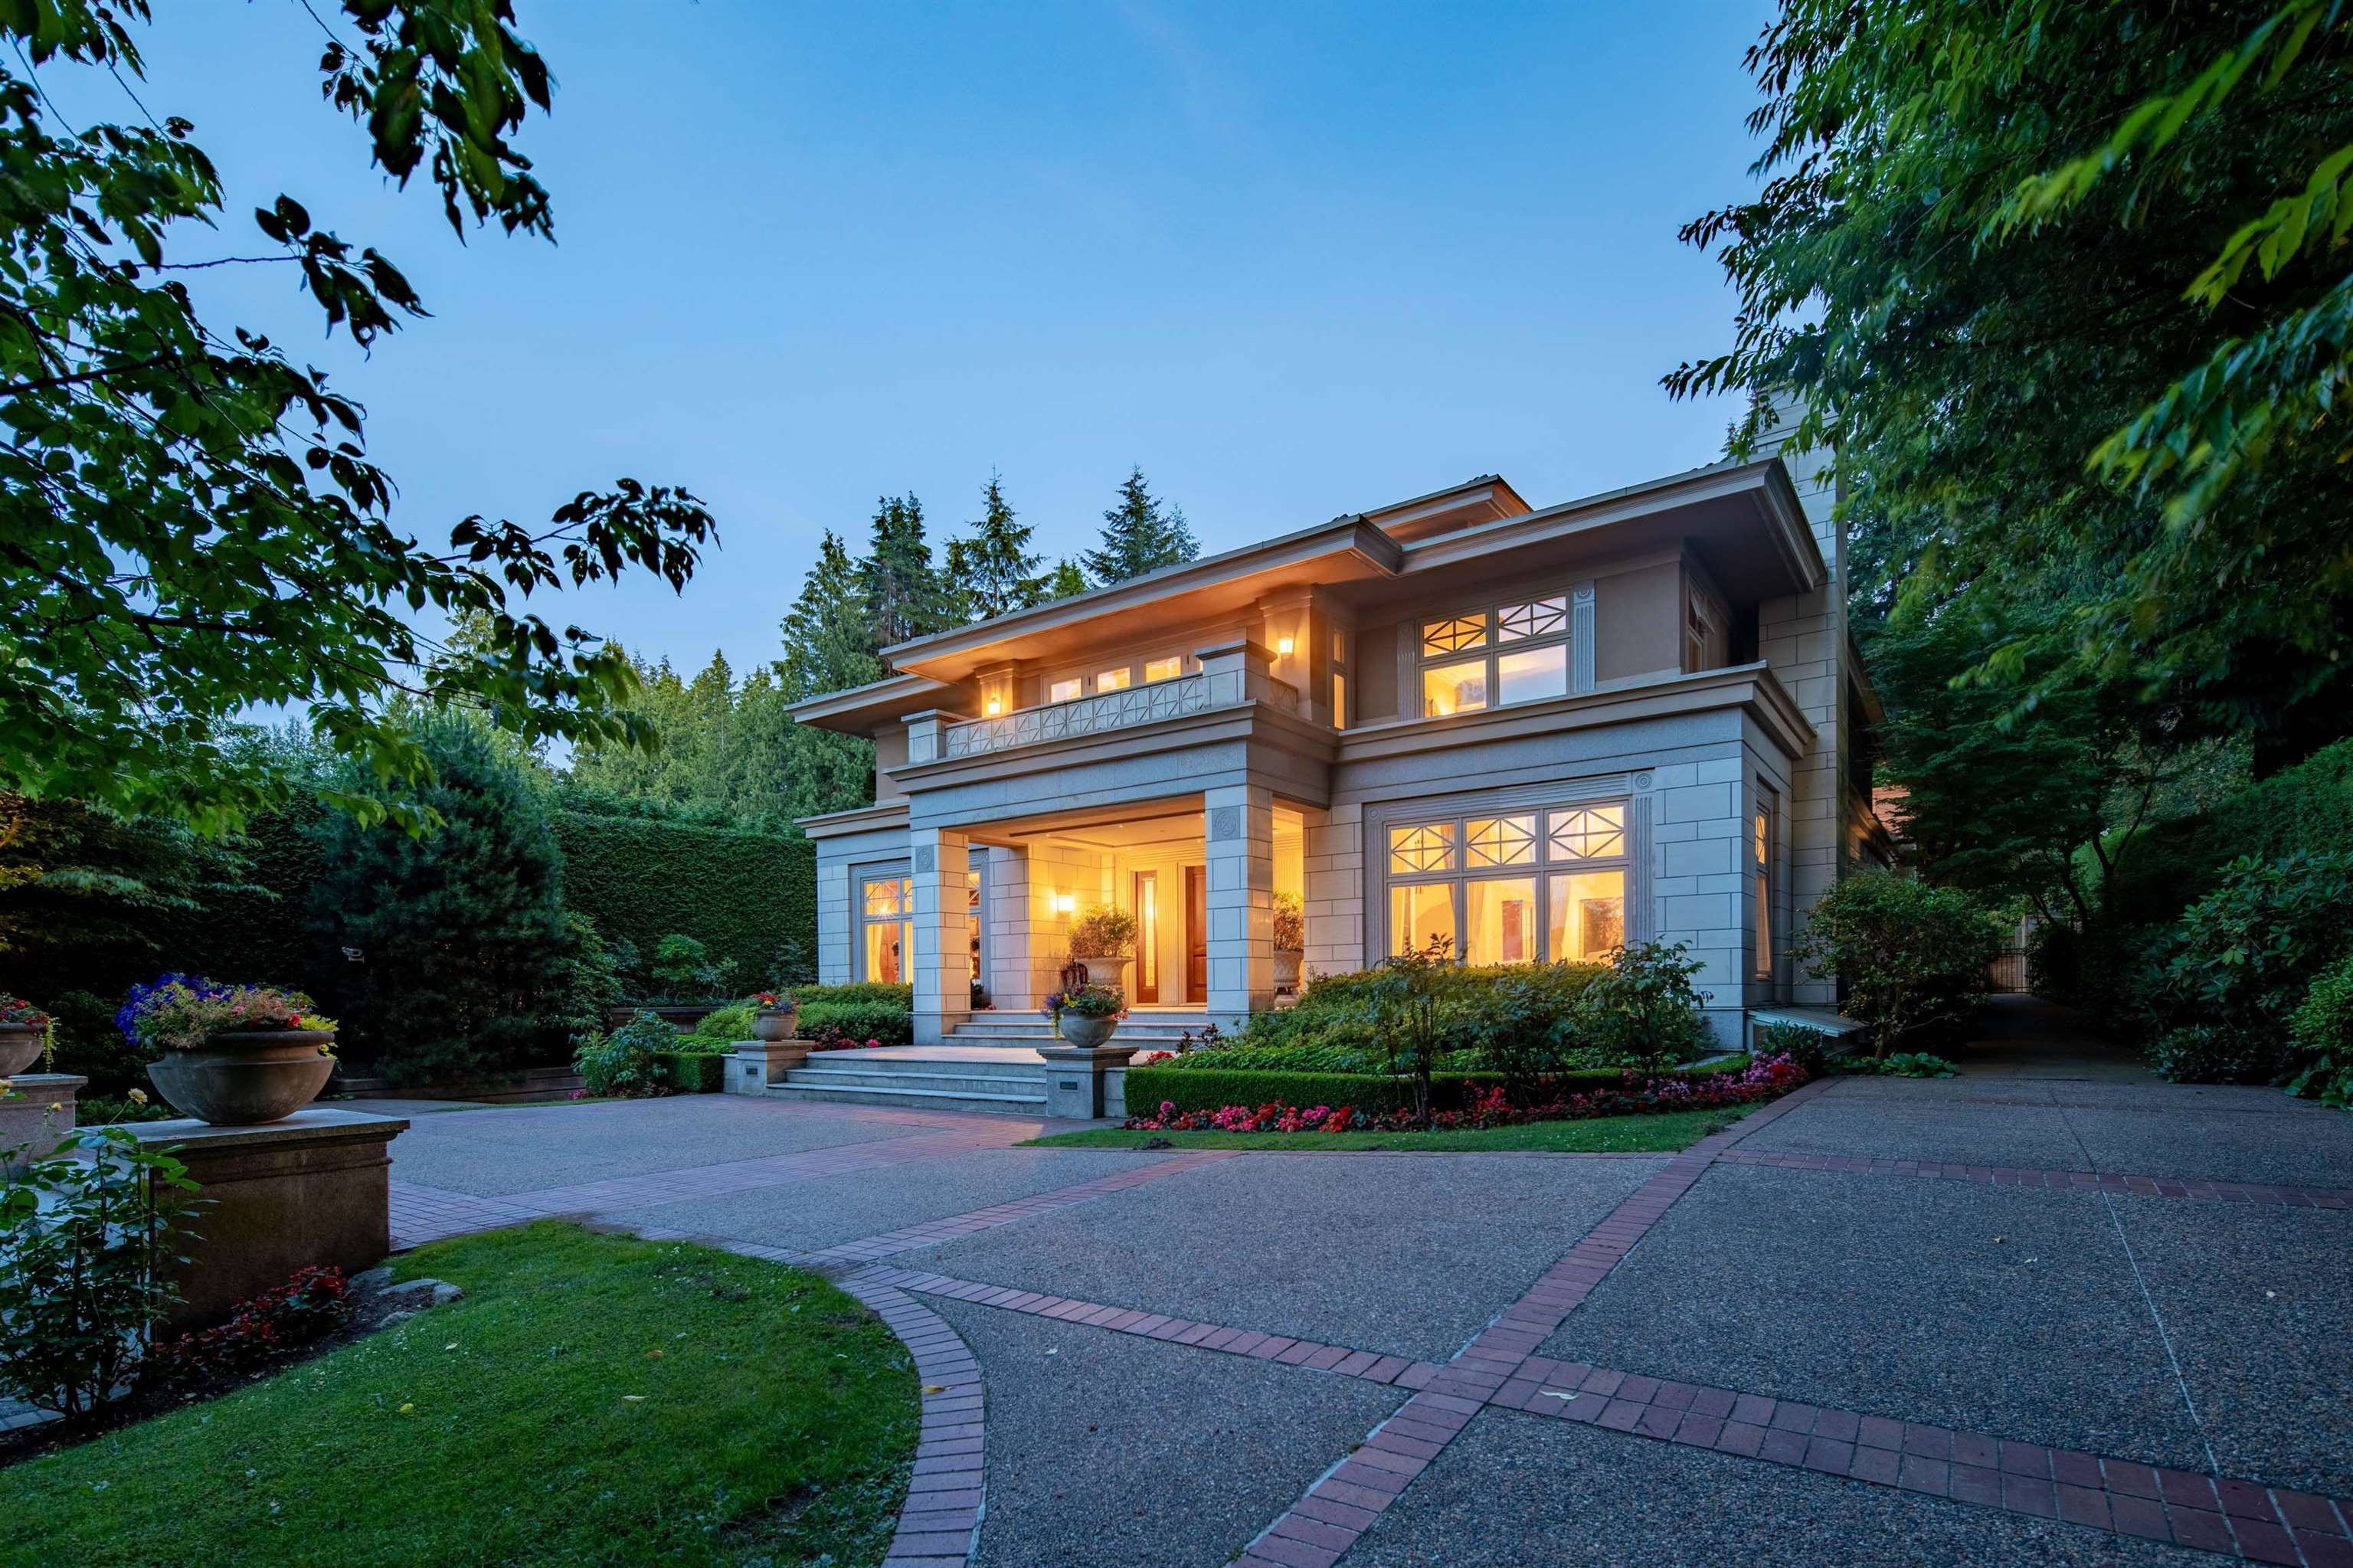 Listing image of 4778 DRUMMOND DRIVE